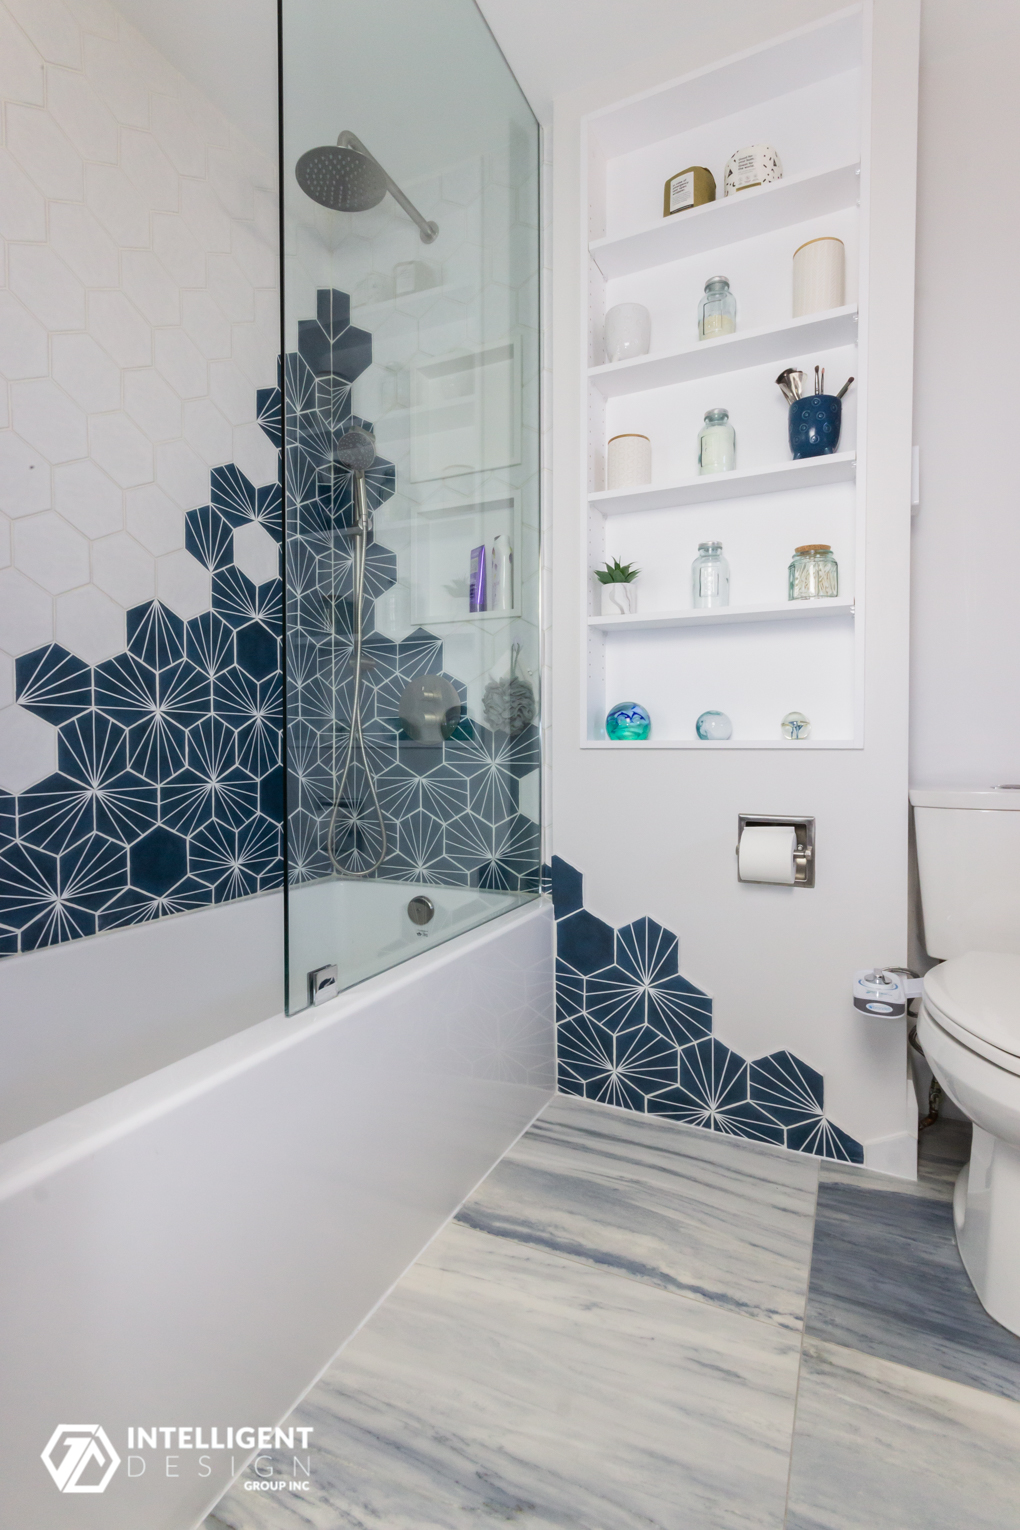 Bathroom renovation completed by Intelligent Design Group, Unit 178